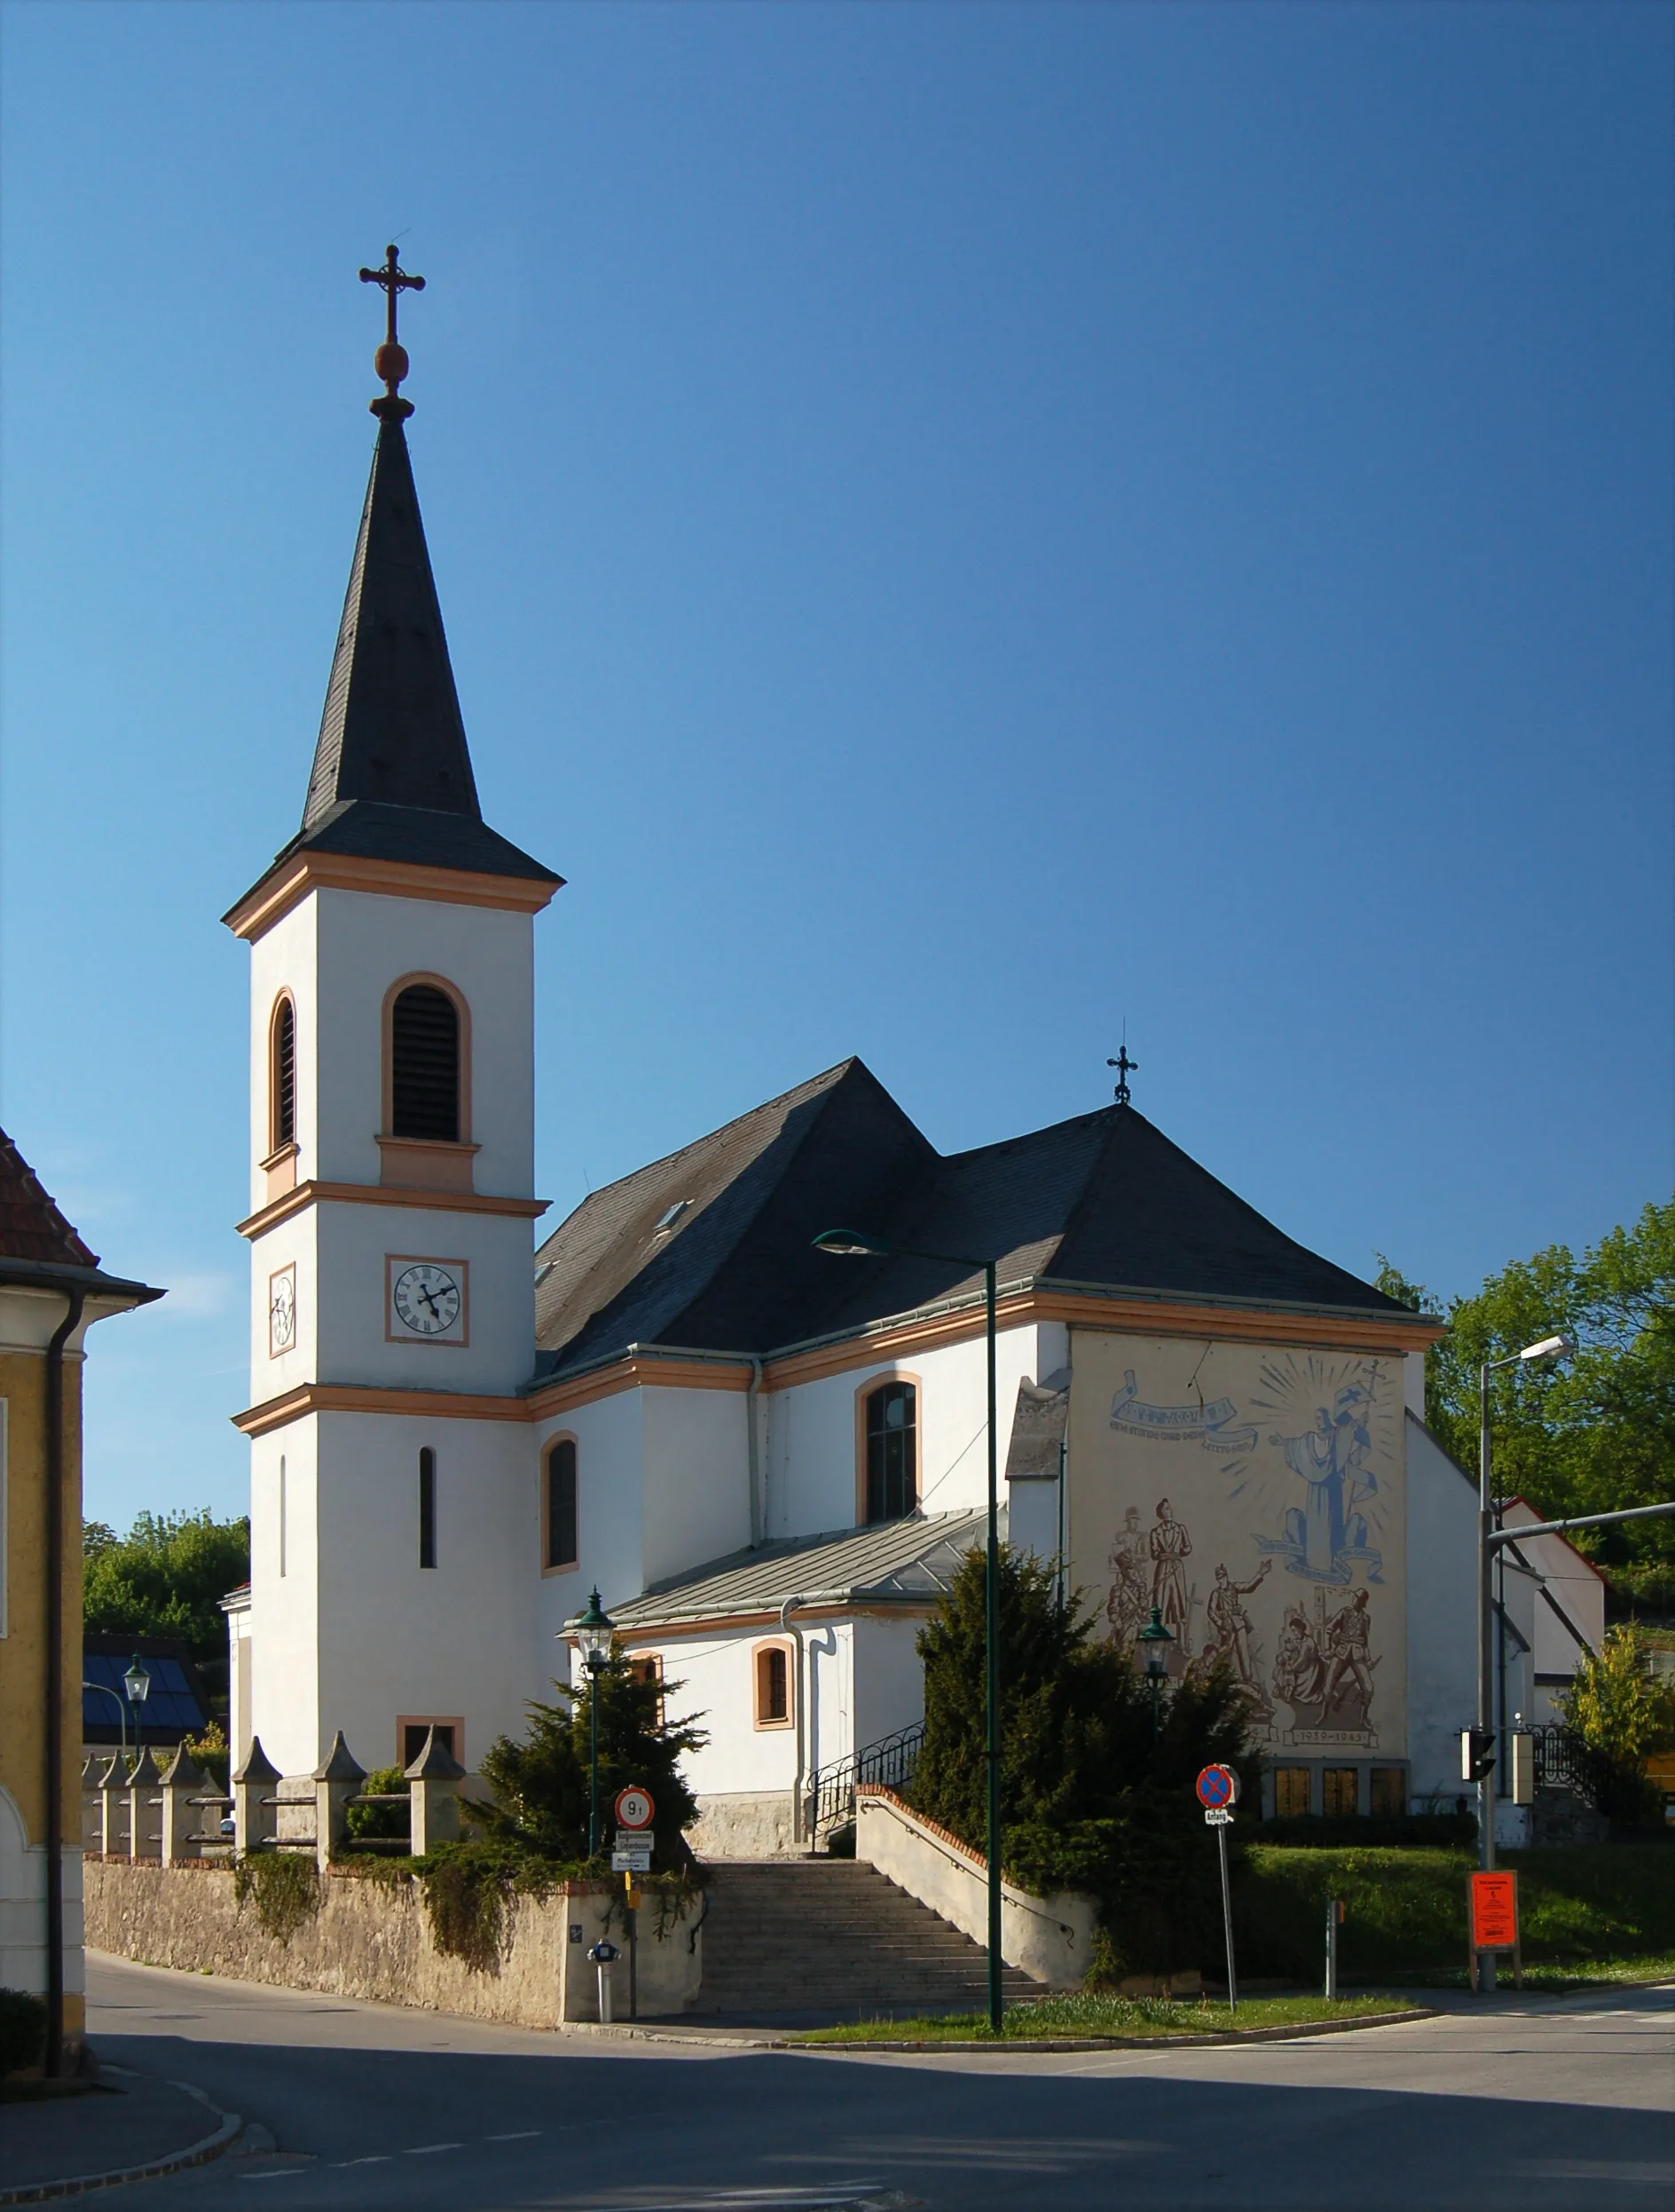 Photo showing: The parish church St. Vitus in St. Veit an der Triesting, in Berndorf, Lower Austria is a cultural heritage monument.